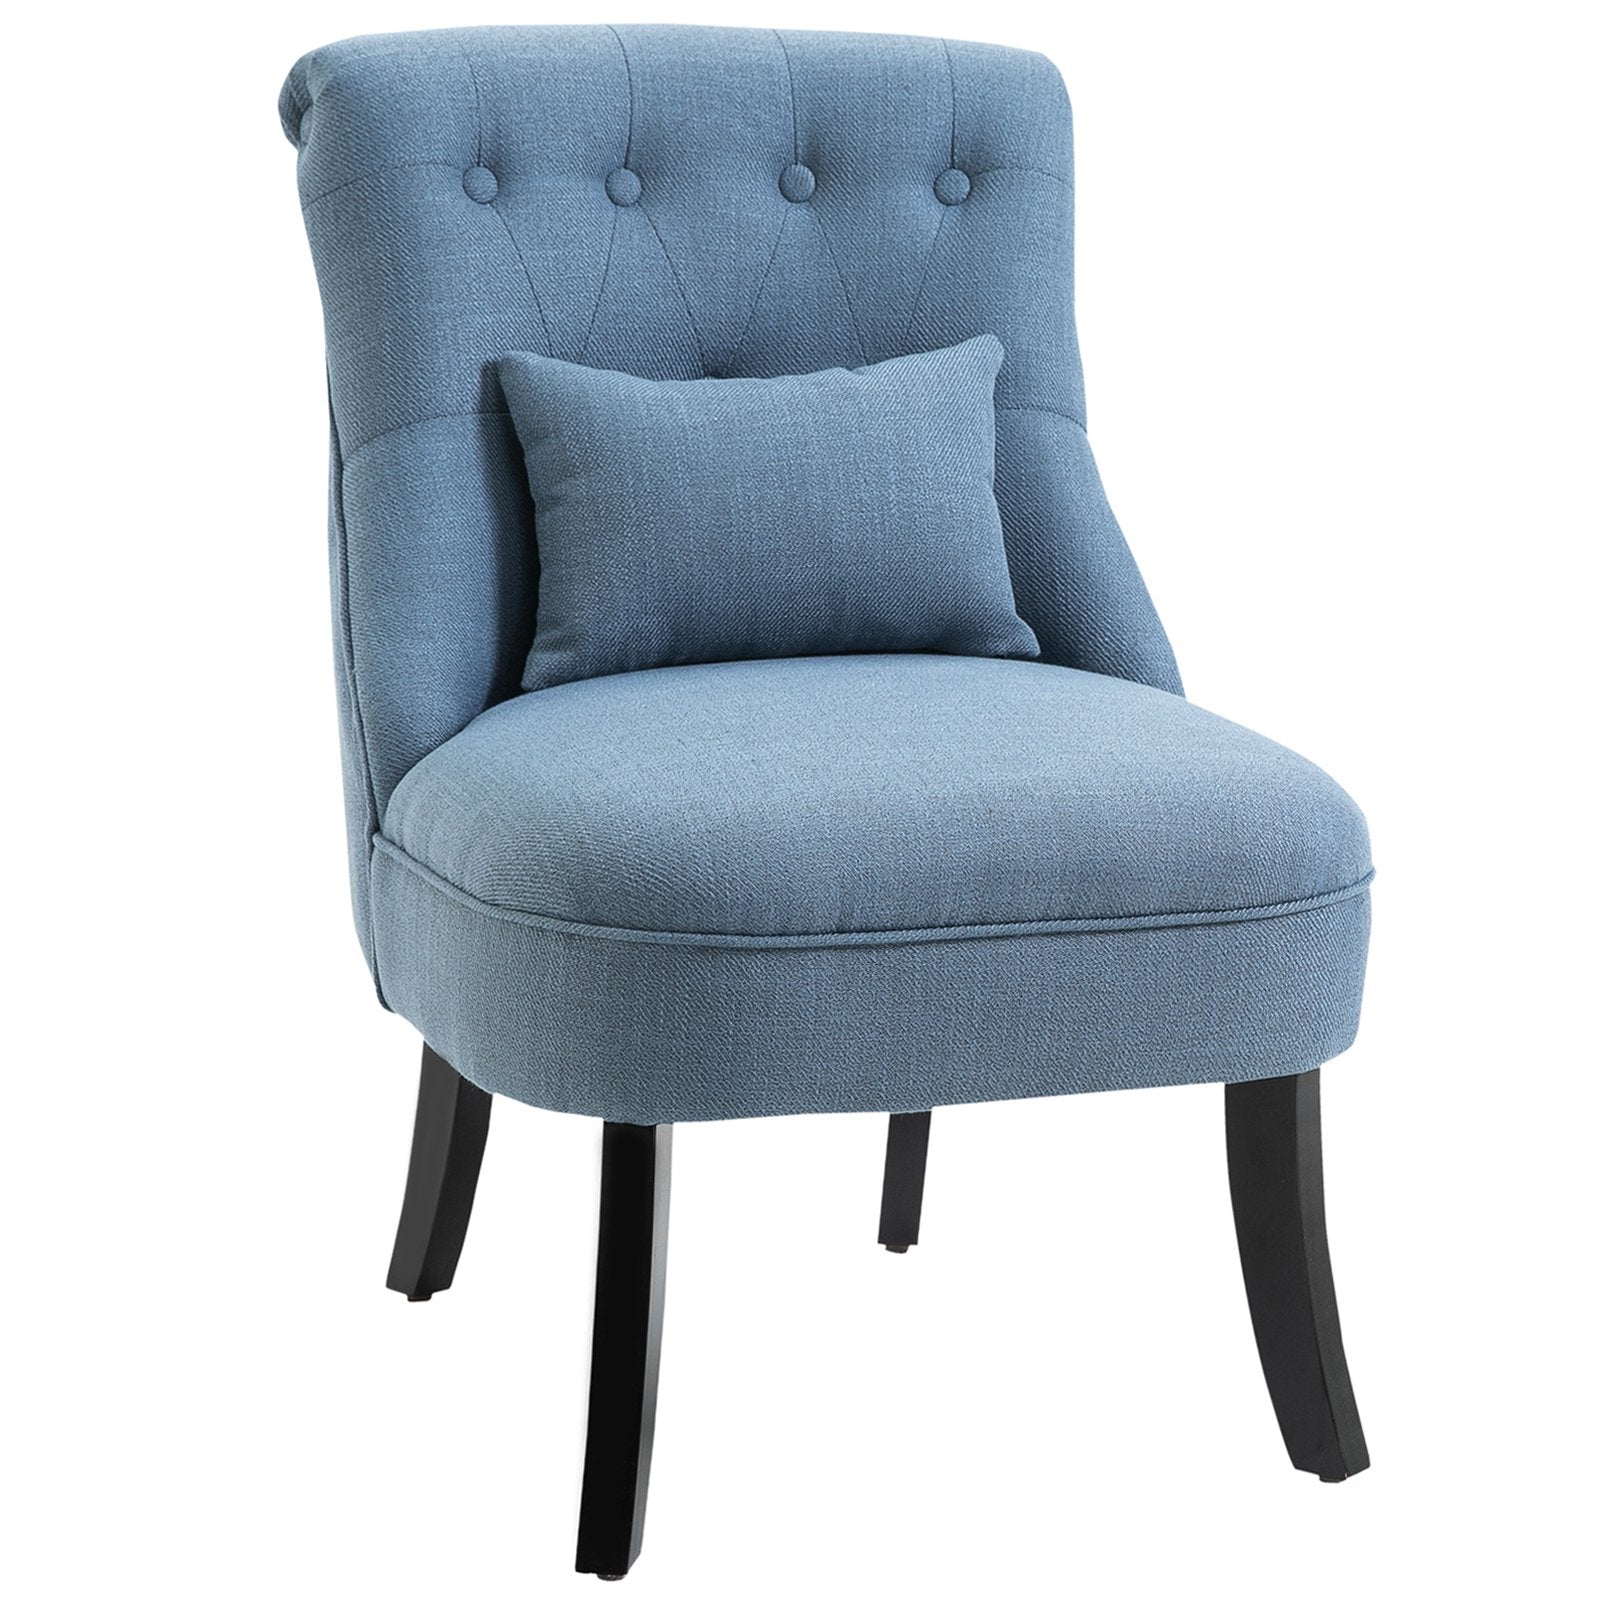 Solid Rubber Wood Tufted Single Sofa Chair W/ Pillow - Blue